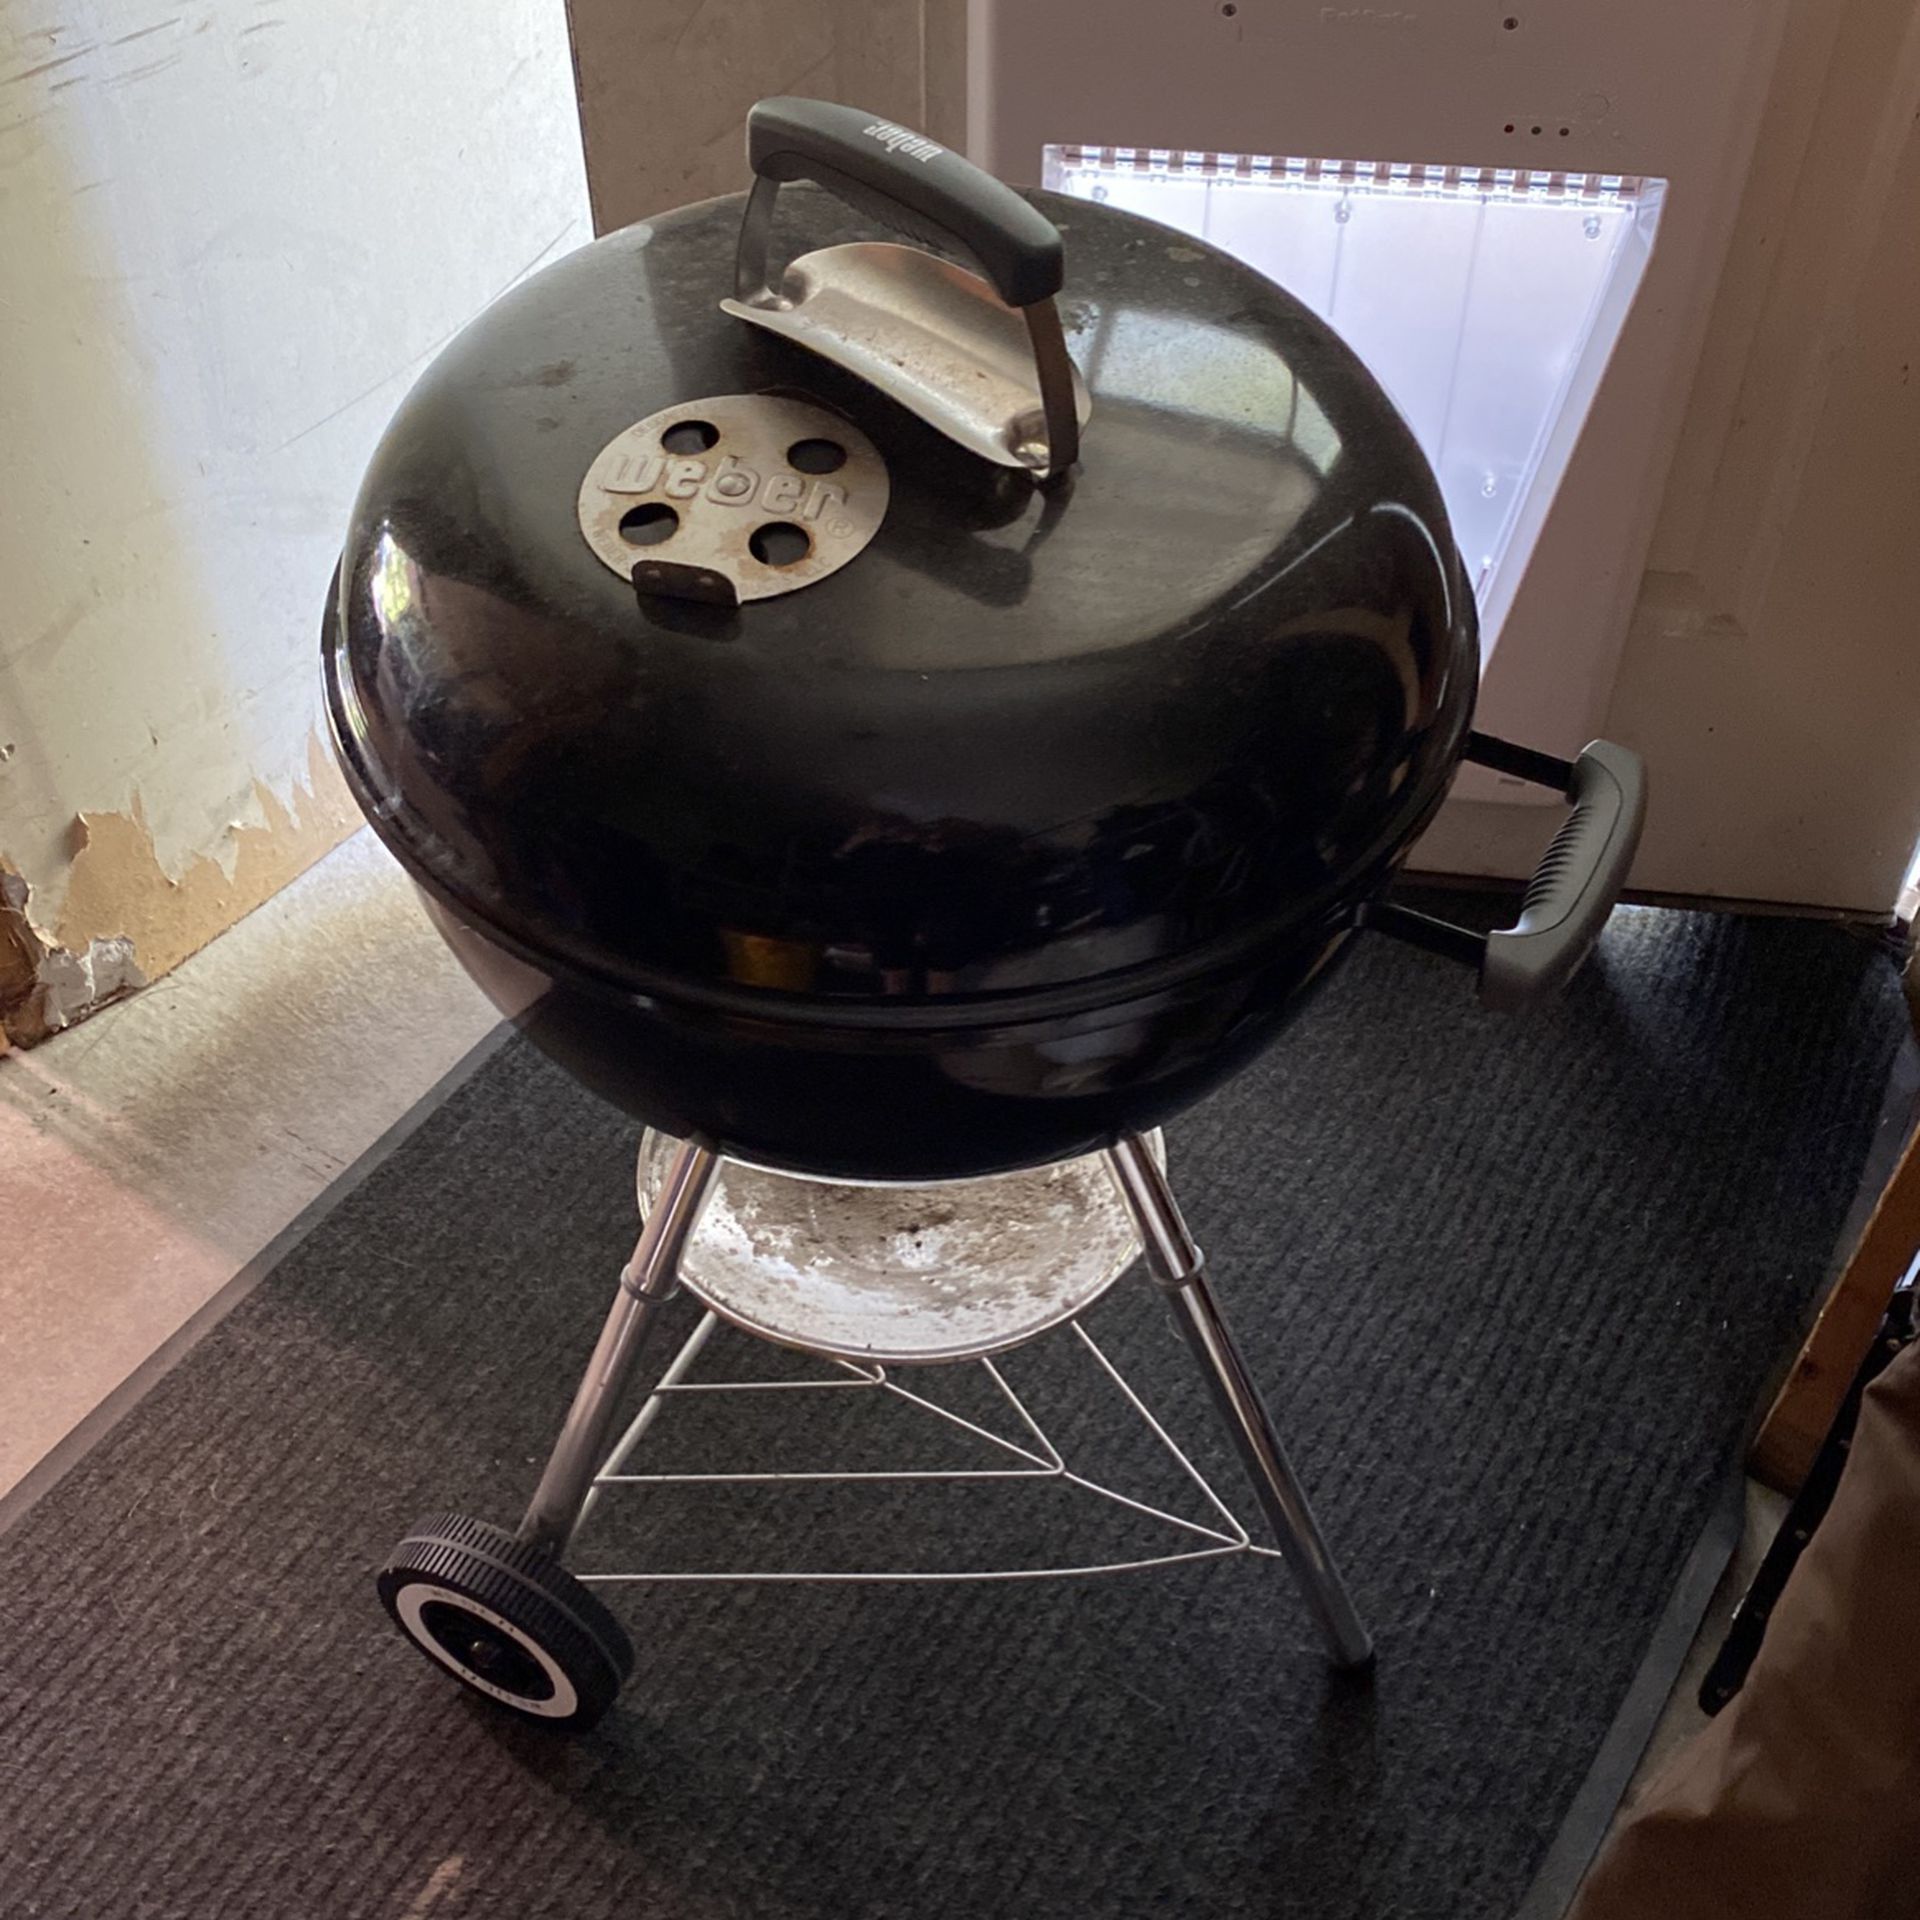 19” Weber Charcoal Grill With Rapid fire Chimney Starter